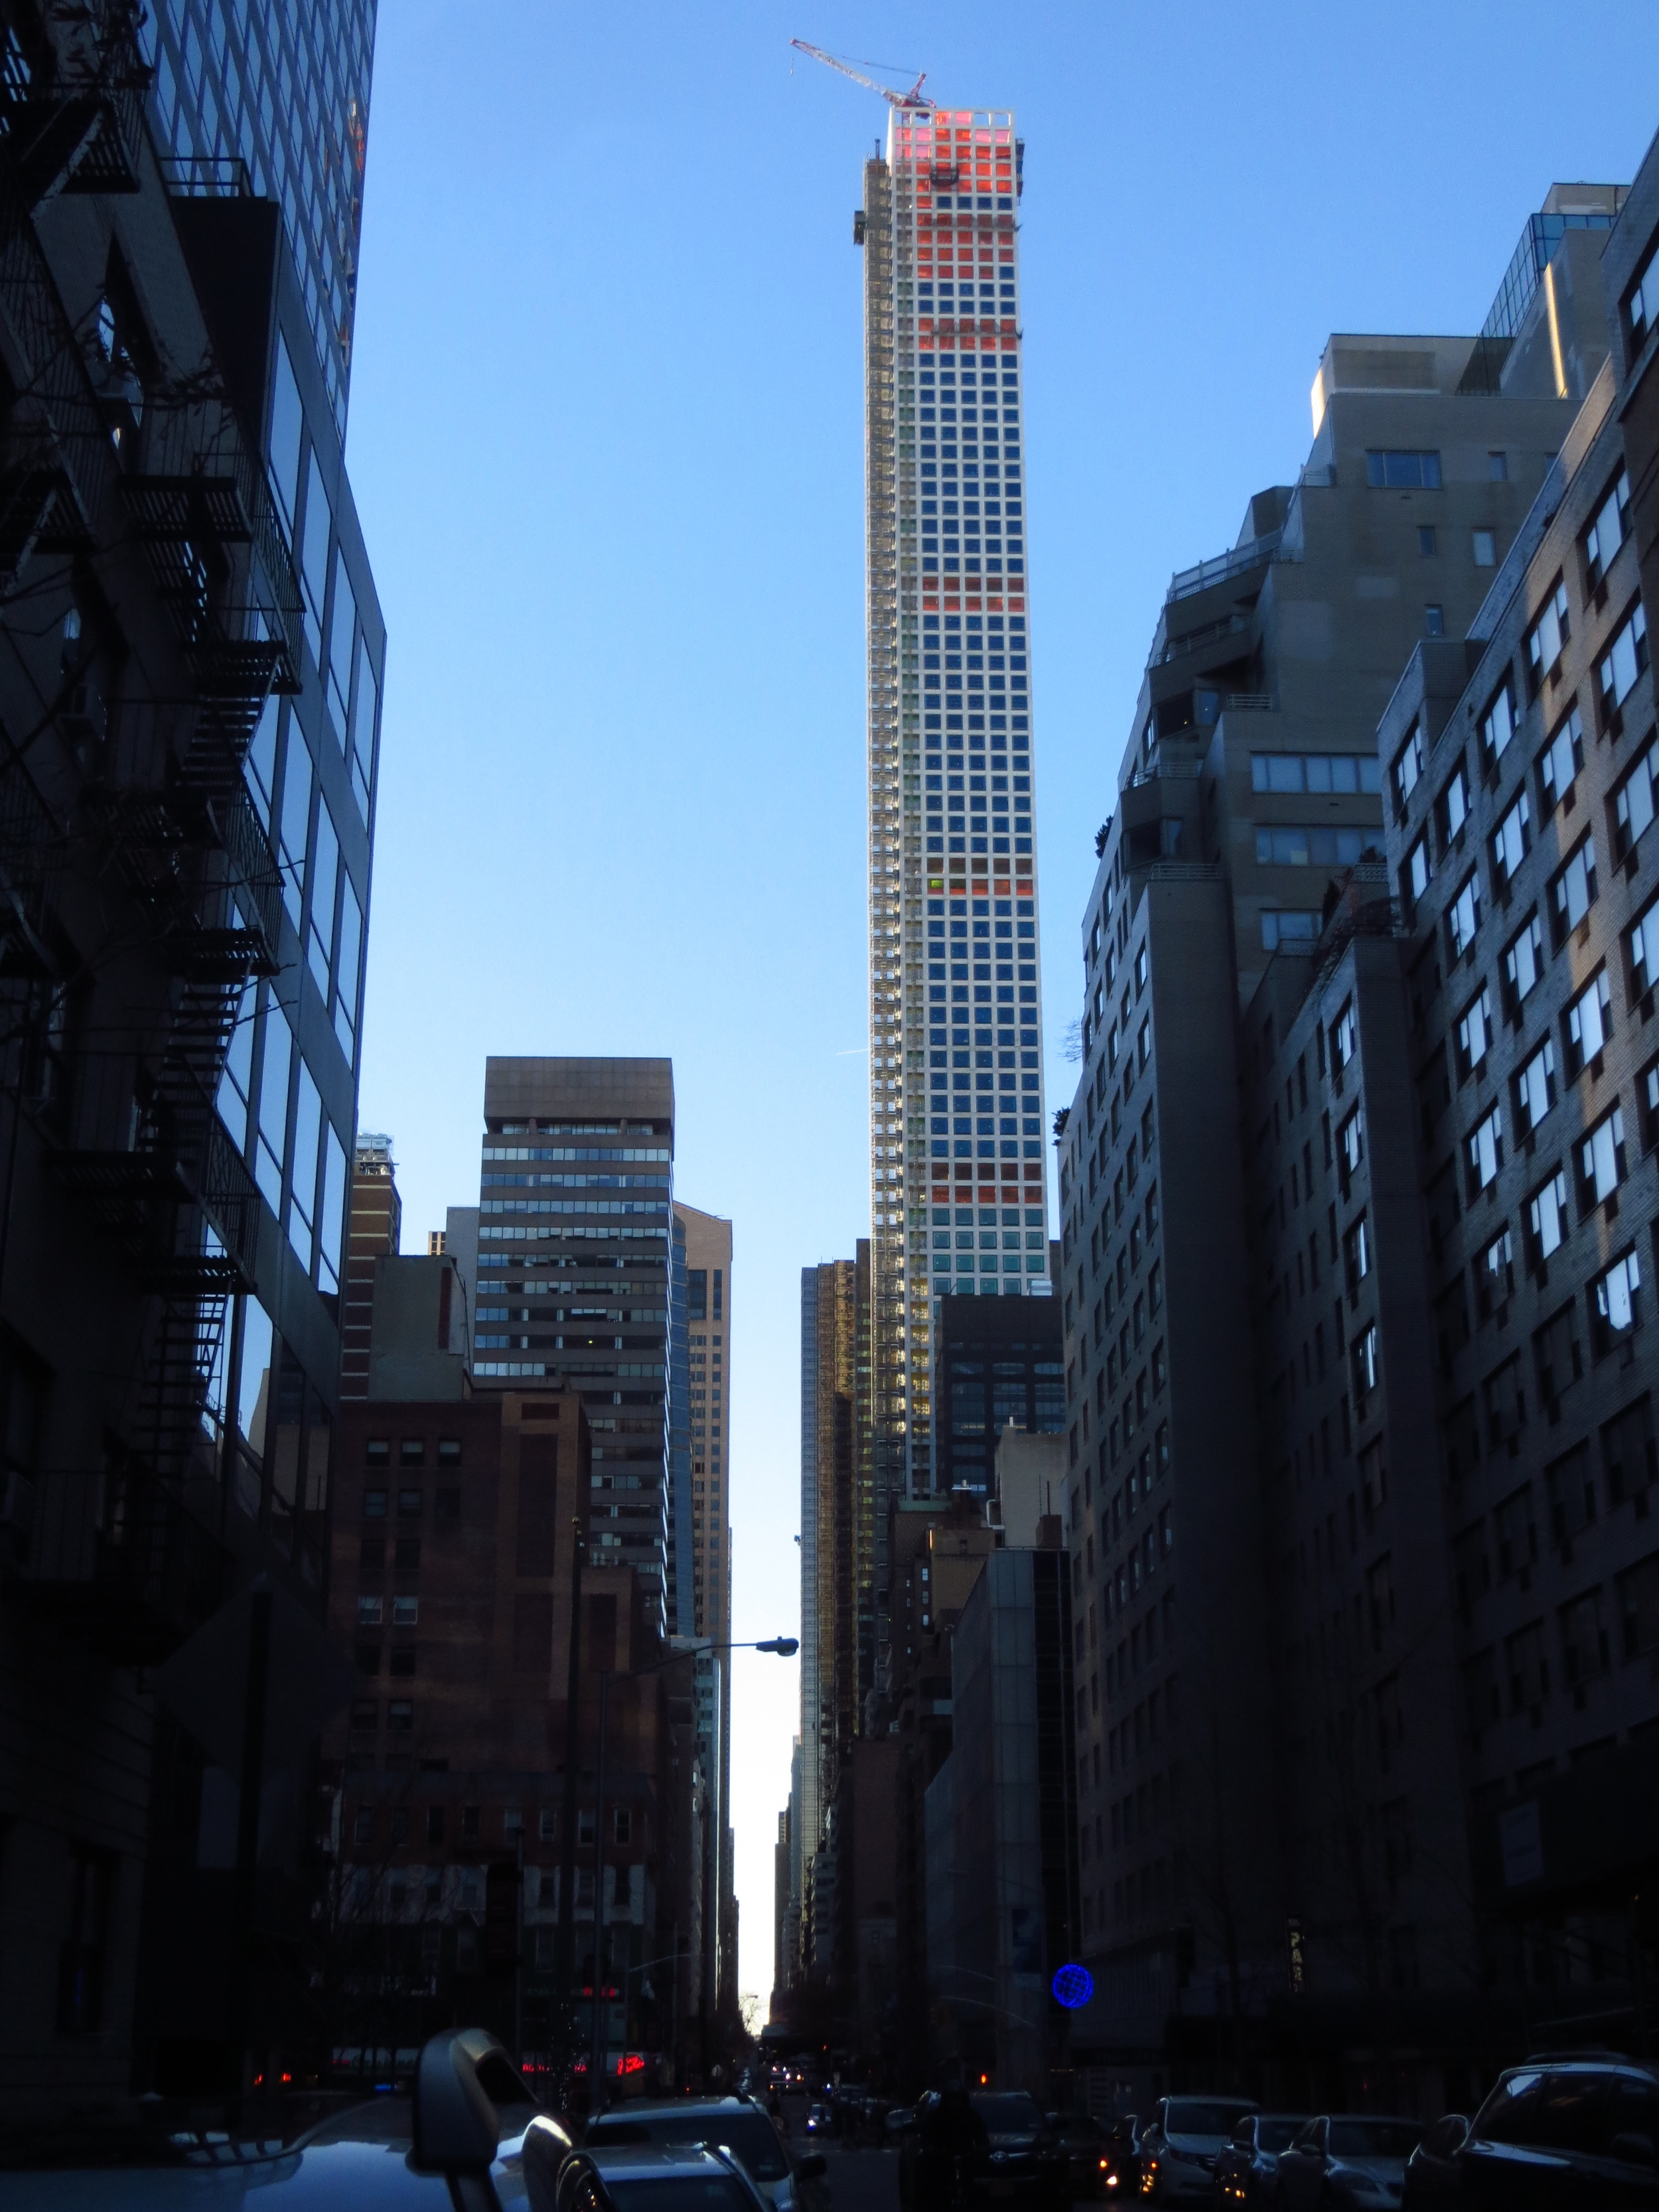 View down 56th St.